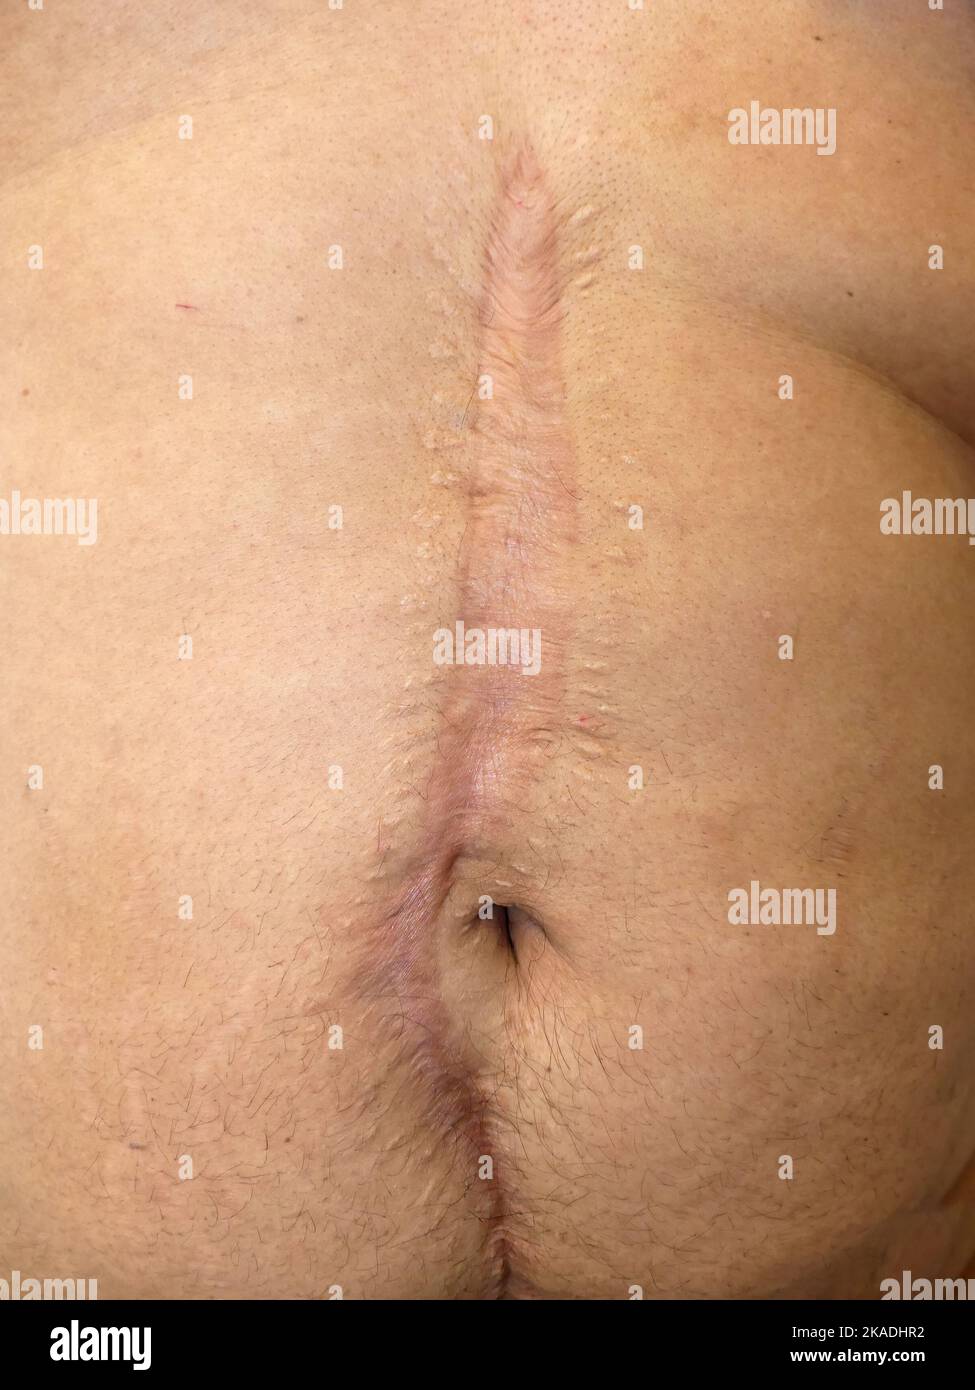 Large scar on the abdomen due to major surgery Stock Photo